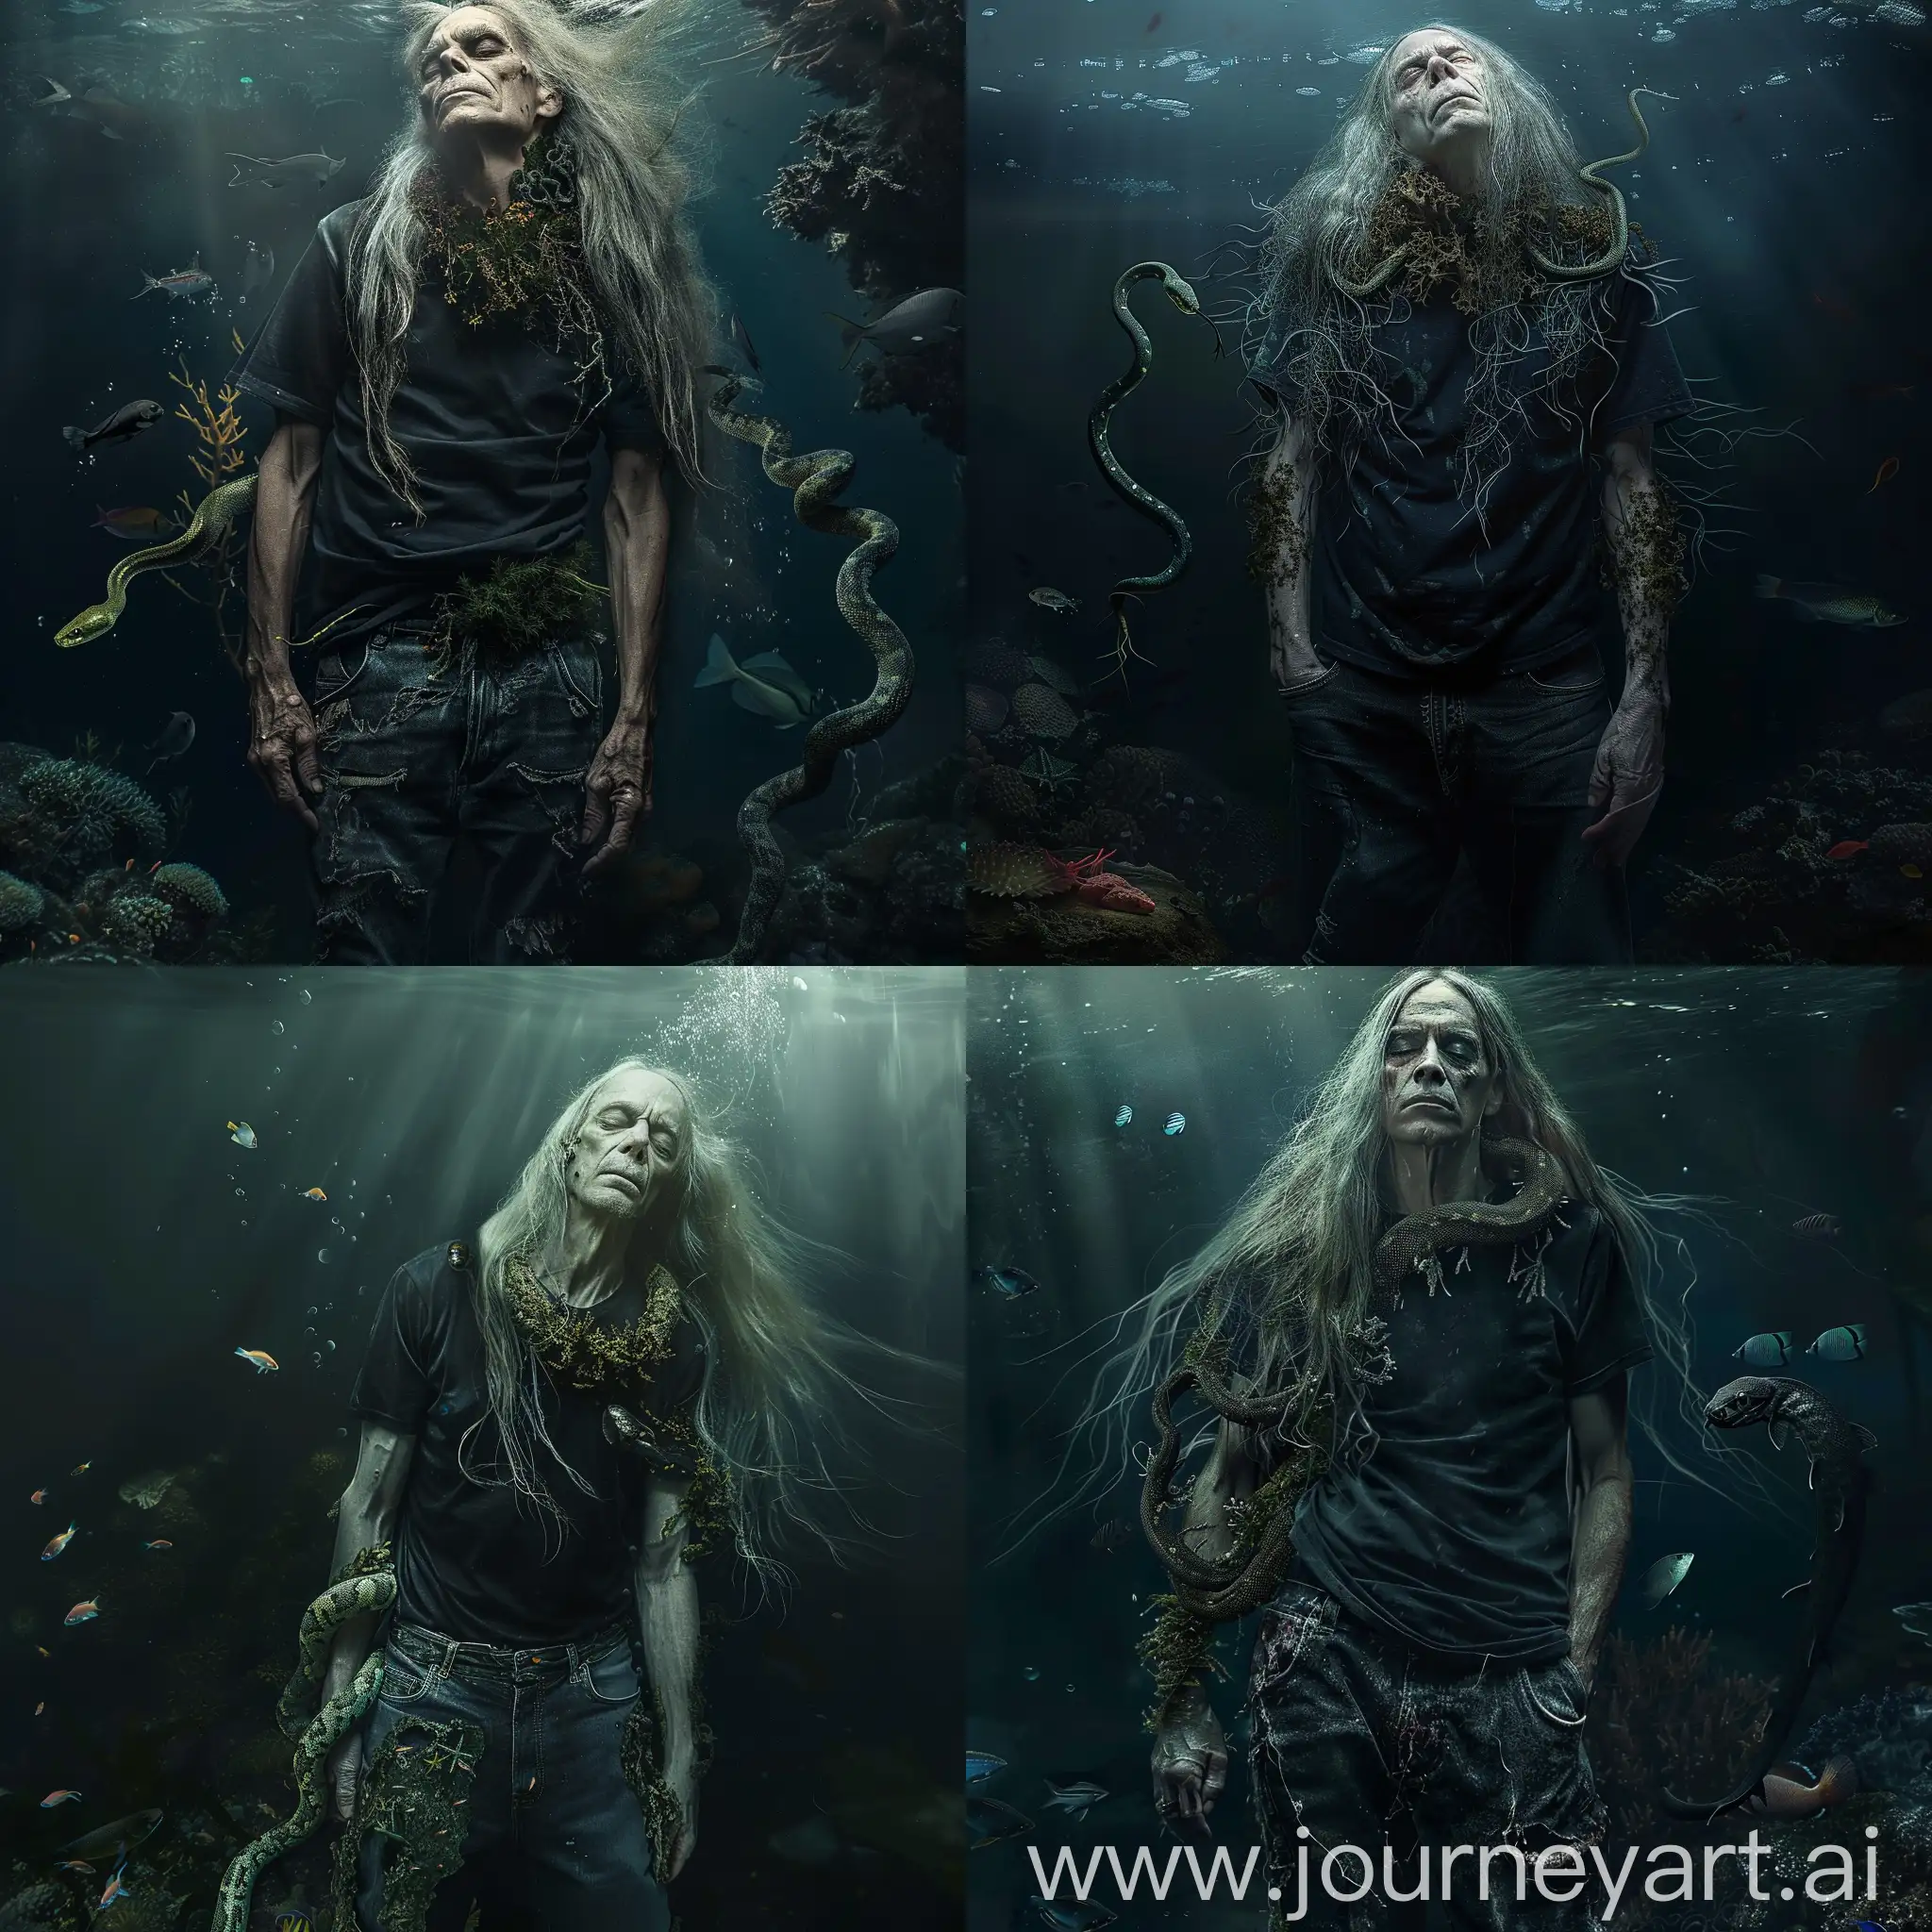 Exploring-the-Abyss-DeepSea-Journey-of-a-LongHaired-Man-with-Coral-Reef-Snake